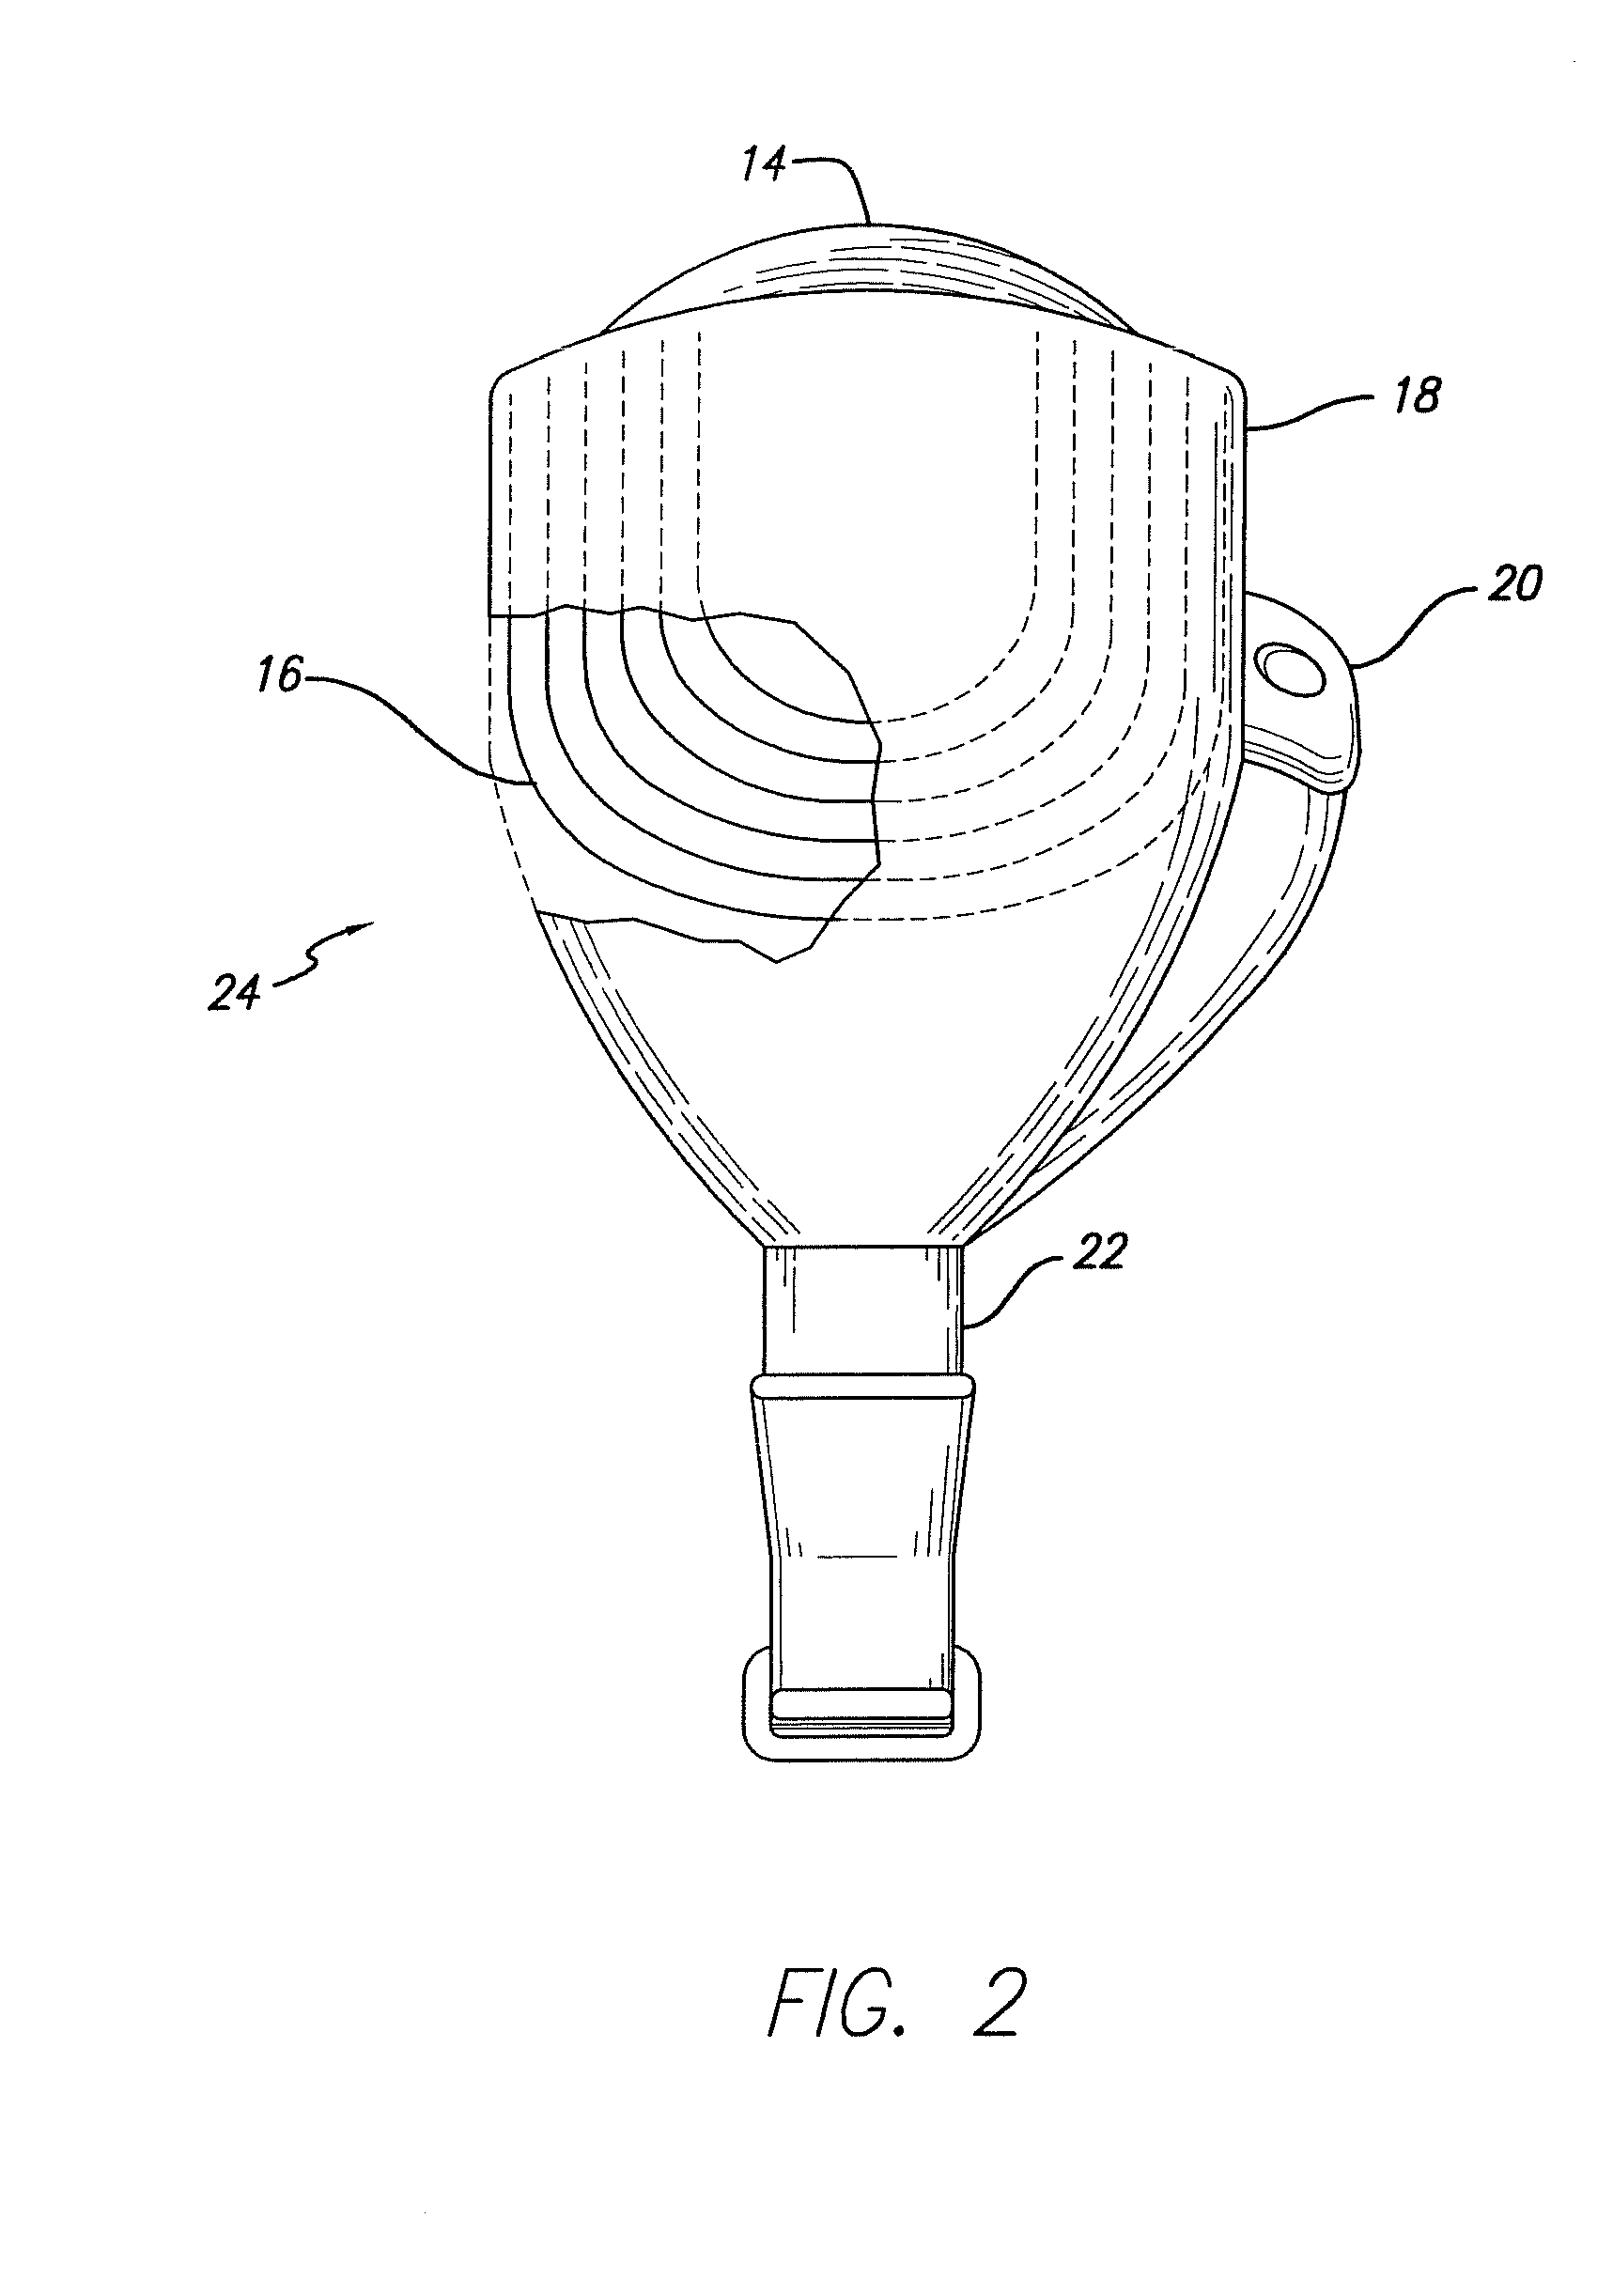 Flexible Circuit Electrode Array with at Least one Tack Opening